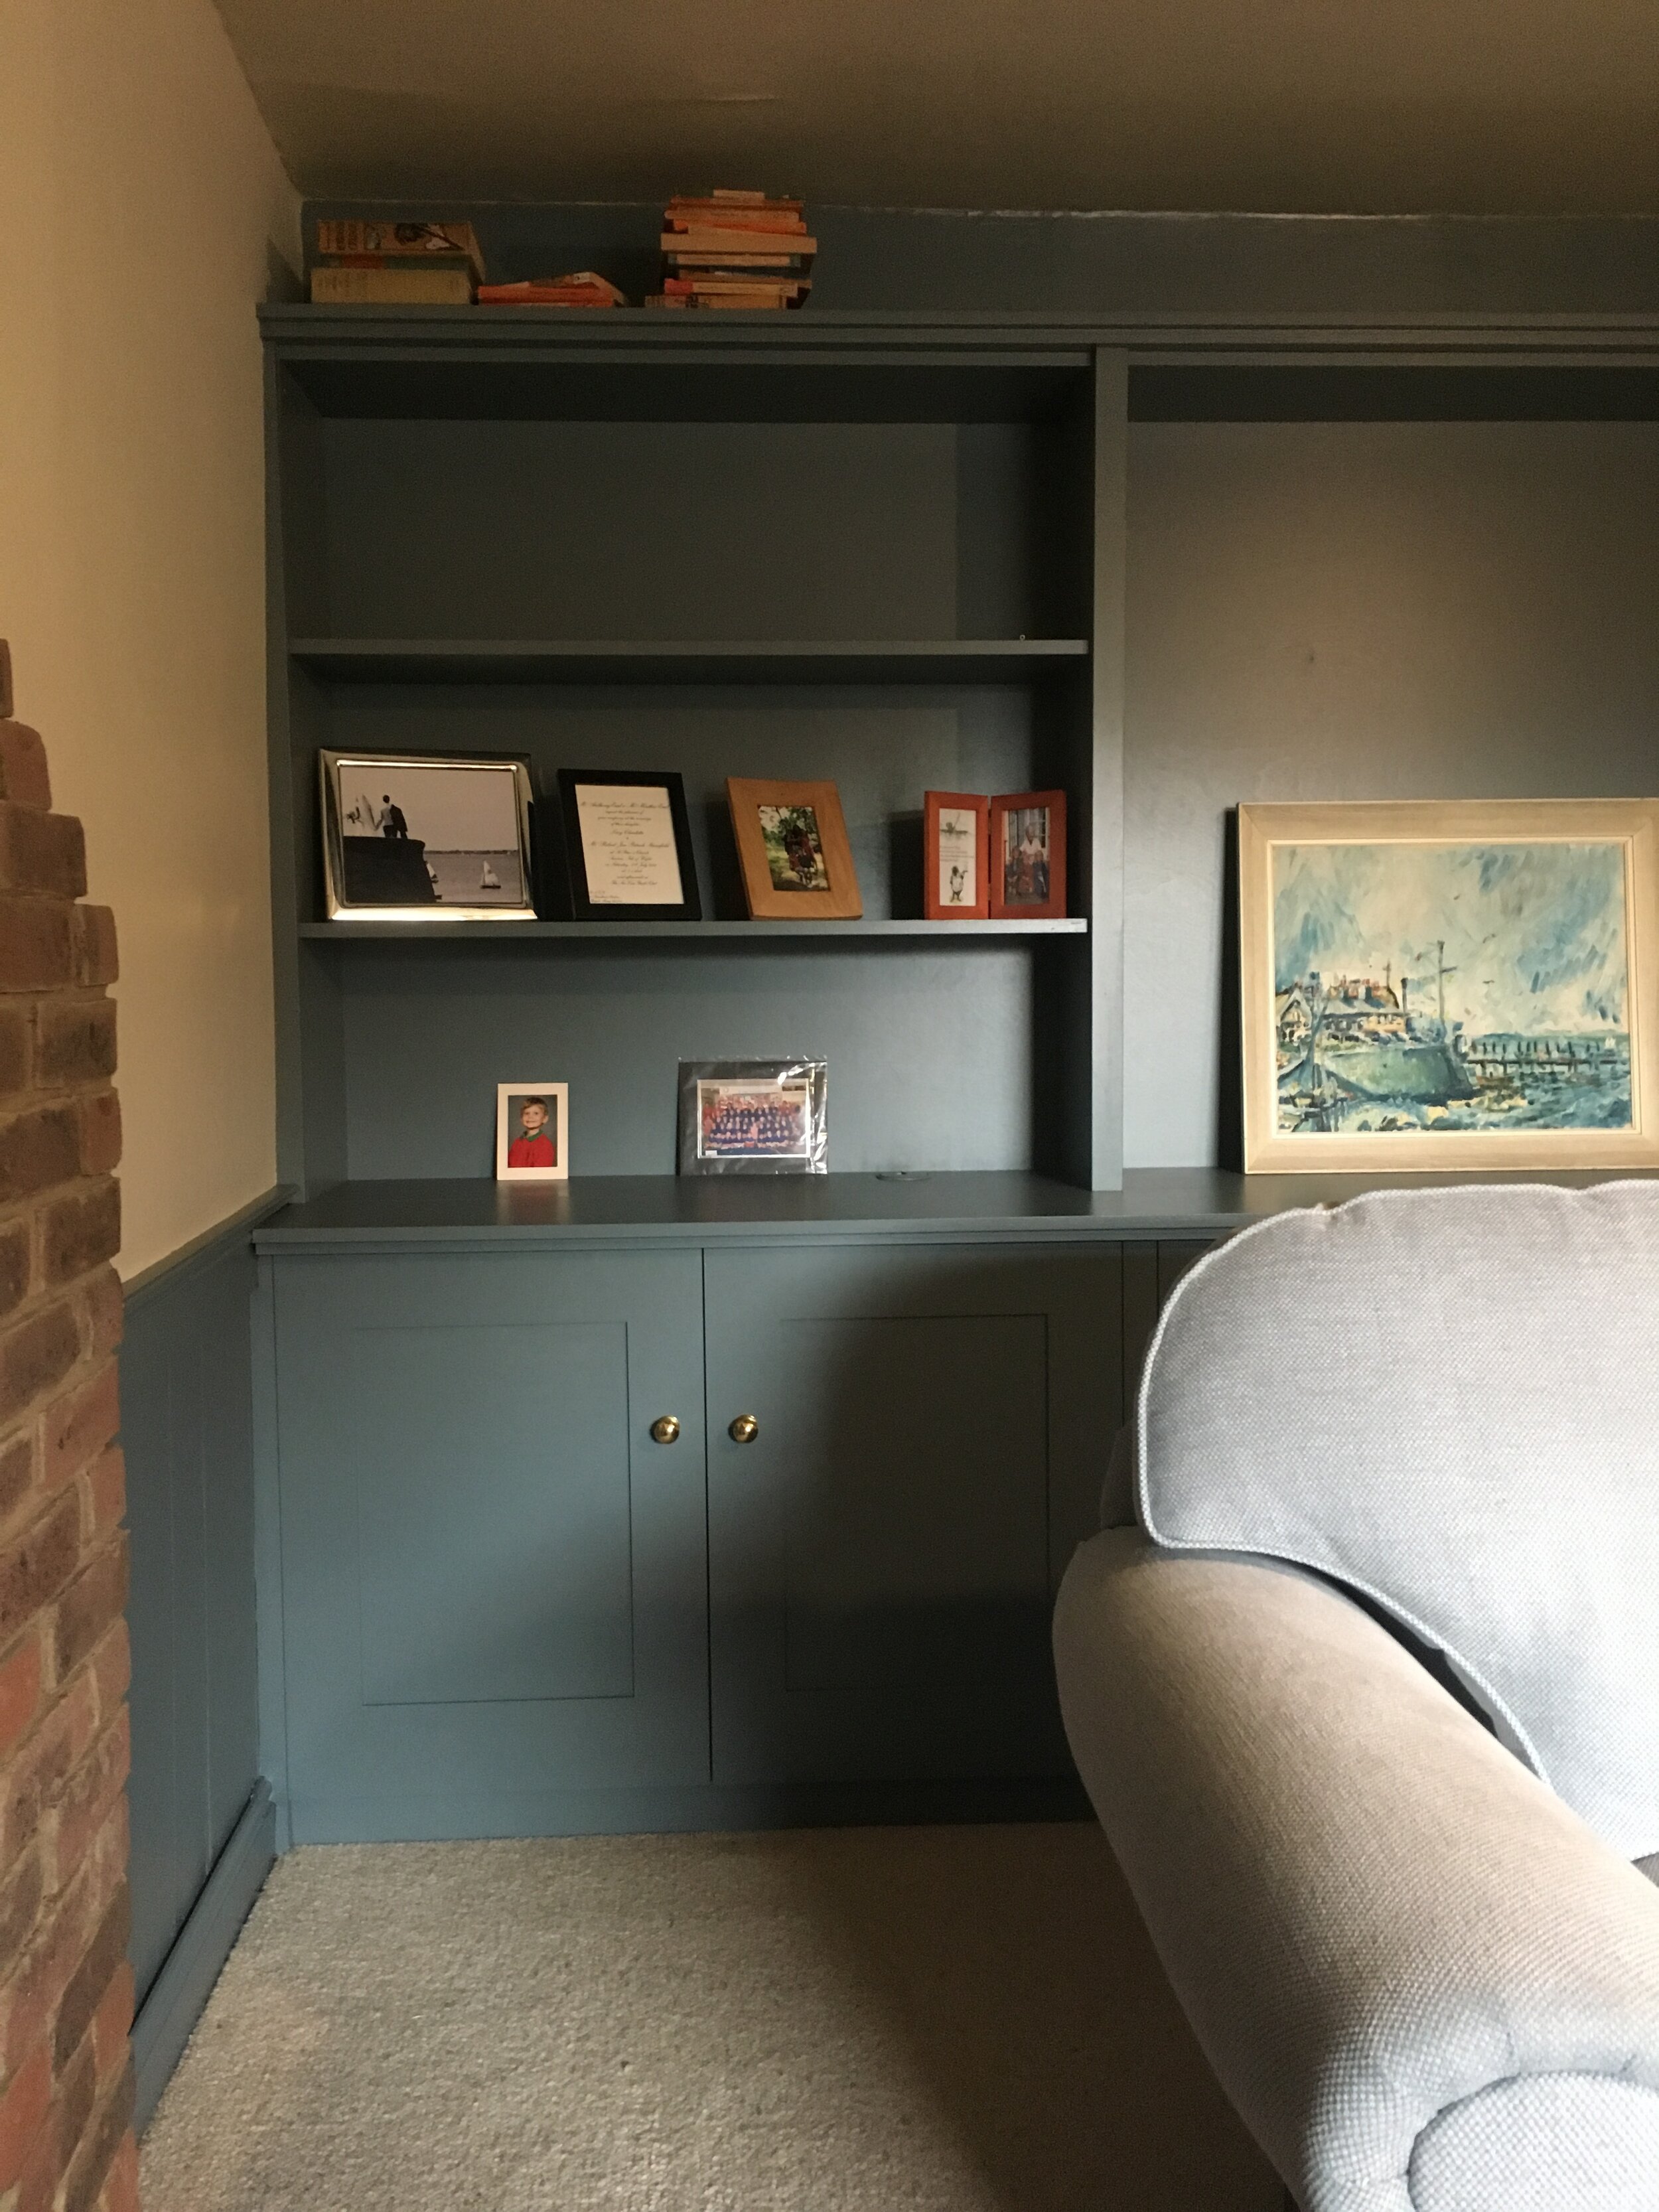 Sitting room bookcases and cupboards.